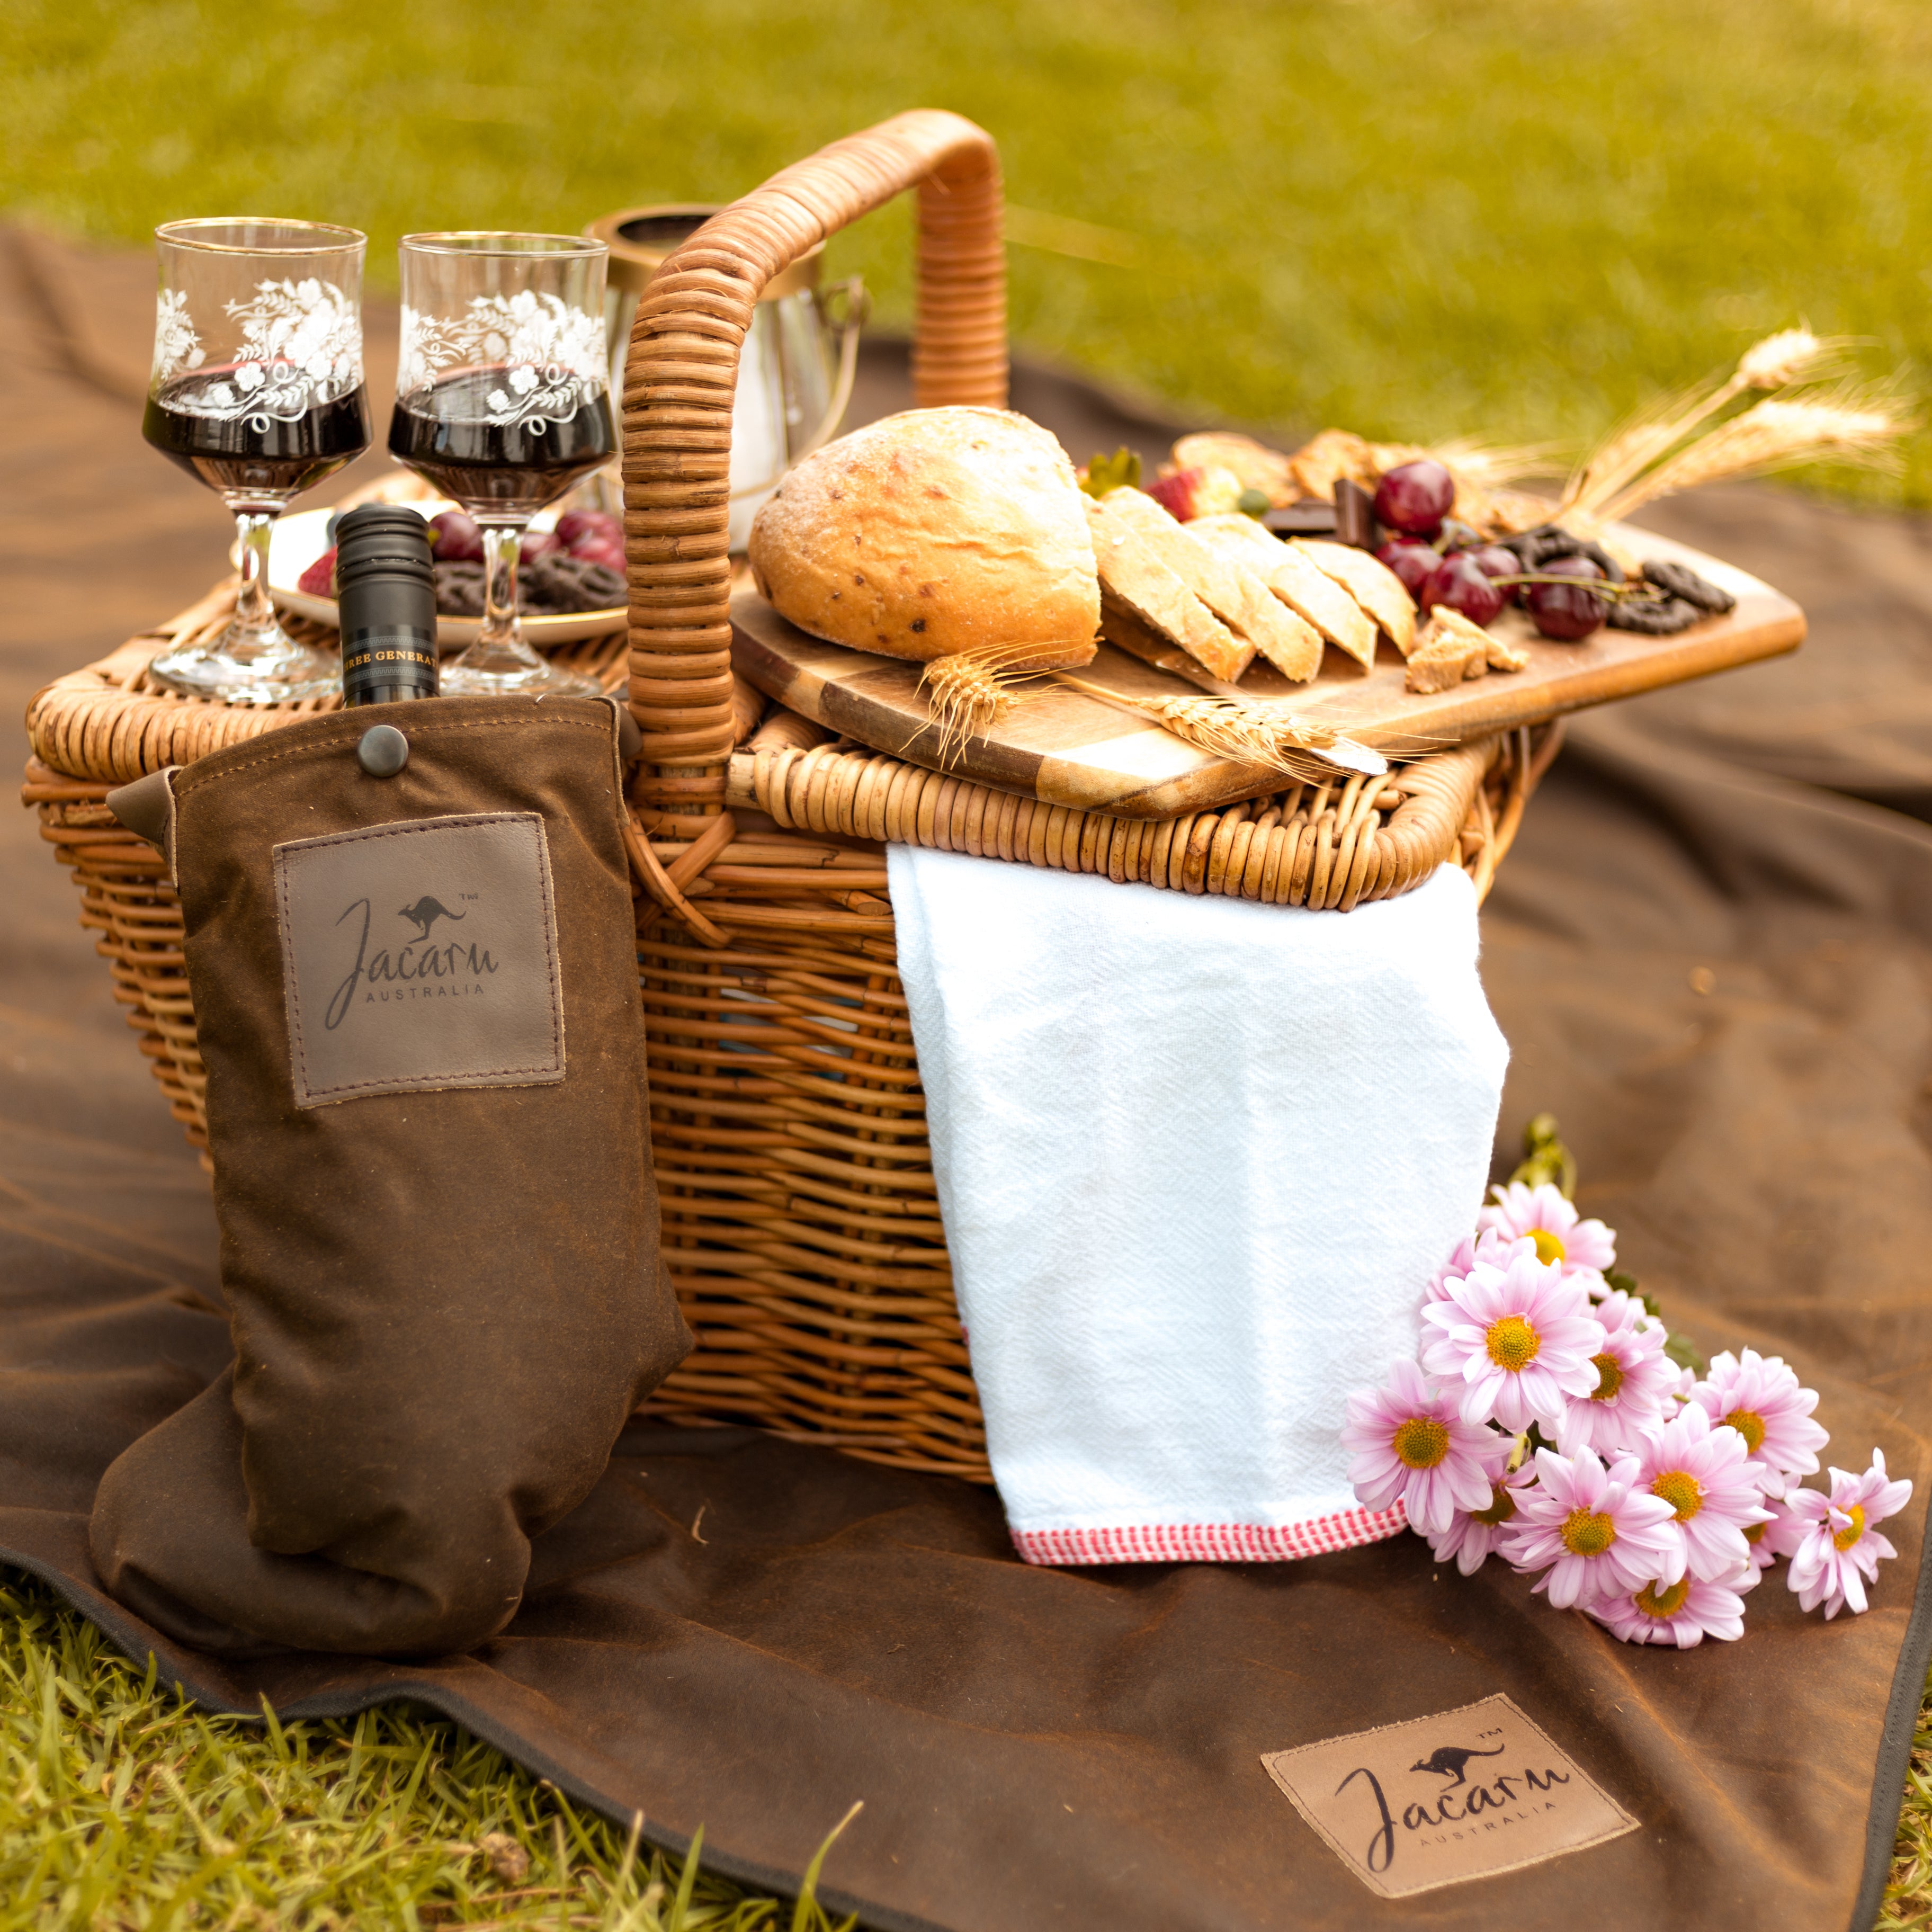 How to picnic like a pro this summer